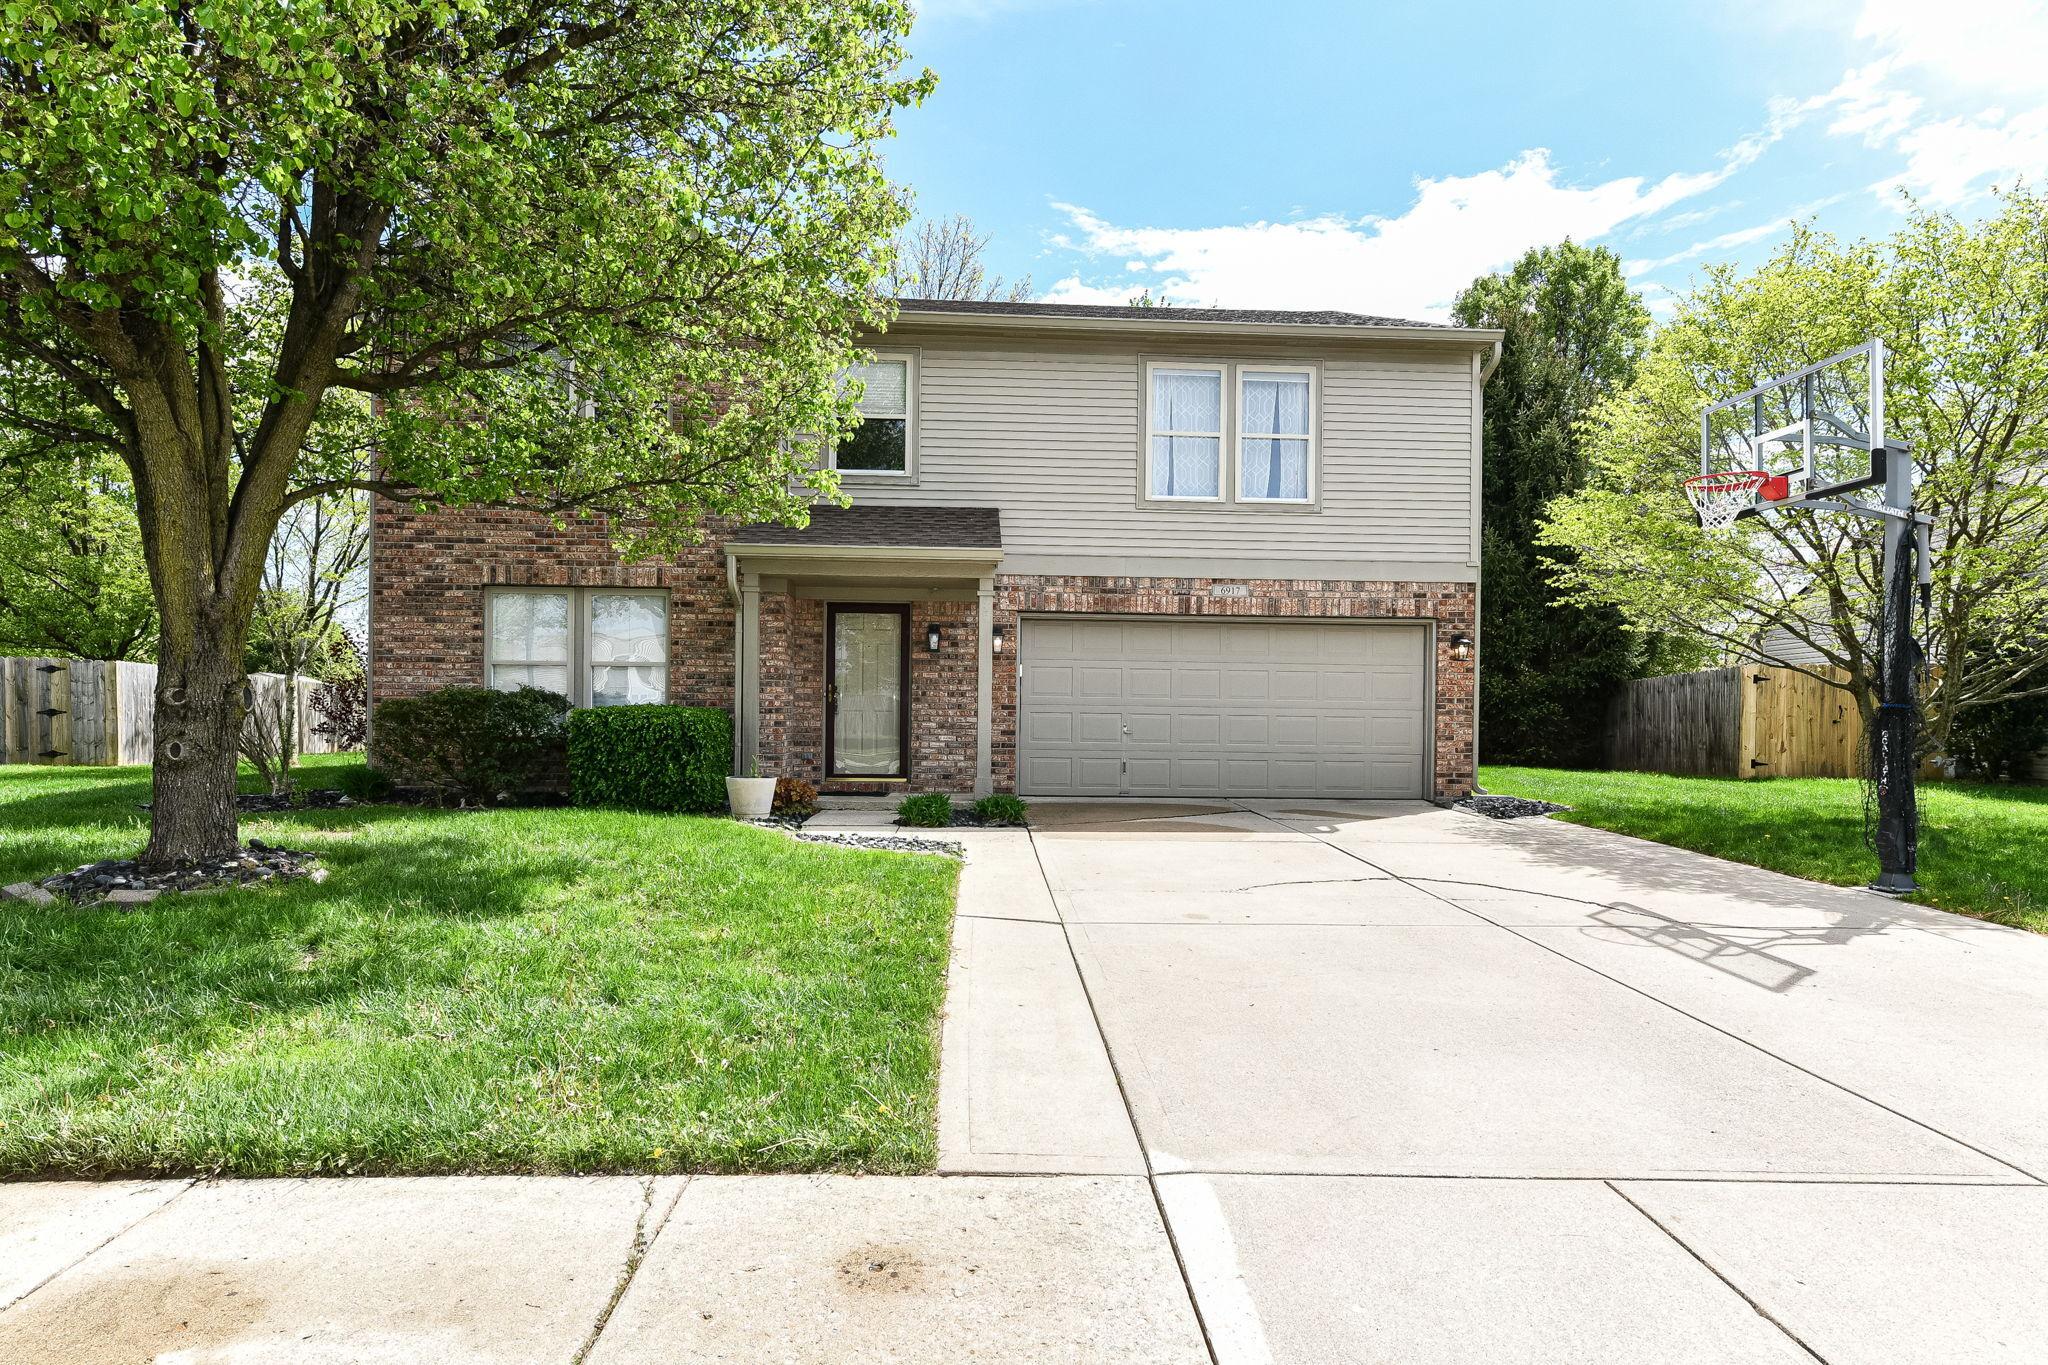 Photo one of 6917 Amber Springs Way Indianapolis IN 46237 | MLS 21975269